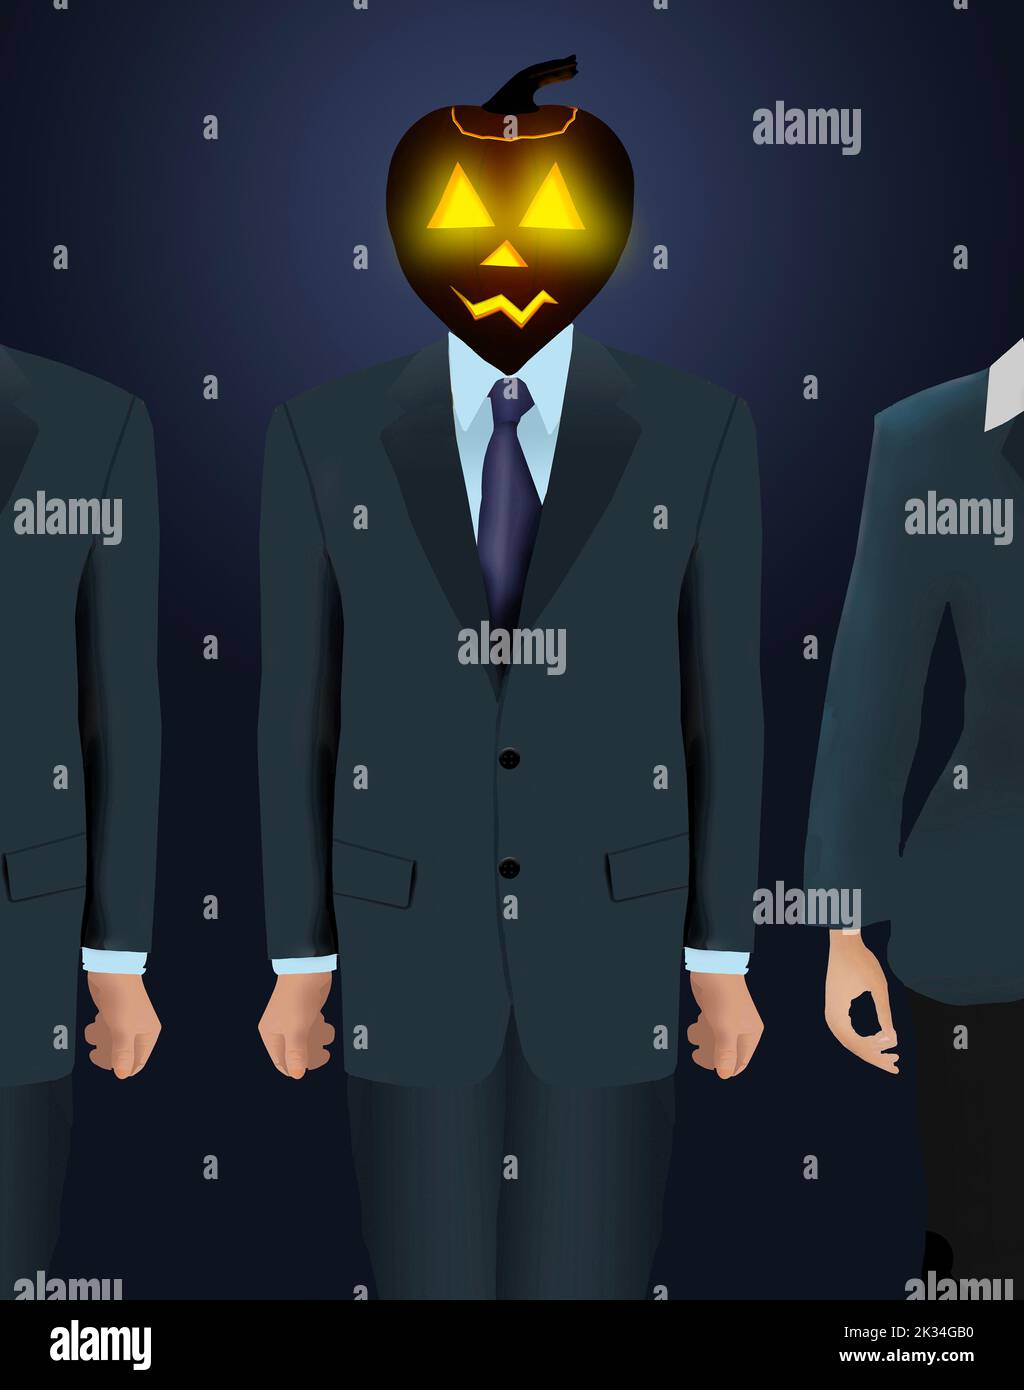 A man in a suit has a glowing pumpkin head for Halloween in this 3-d illustration. Stock Photo